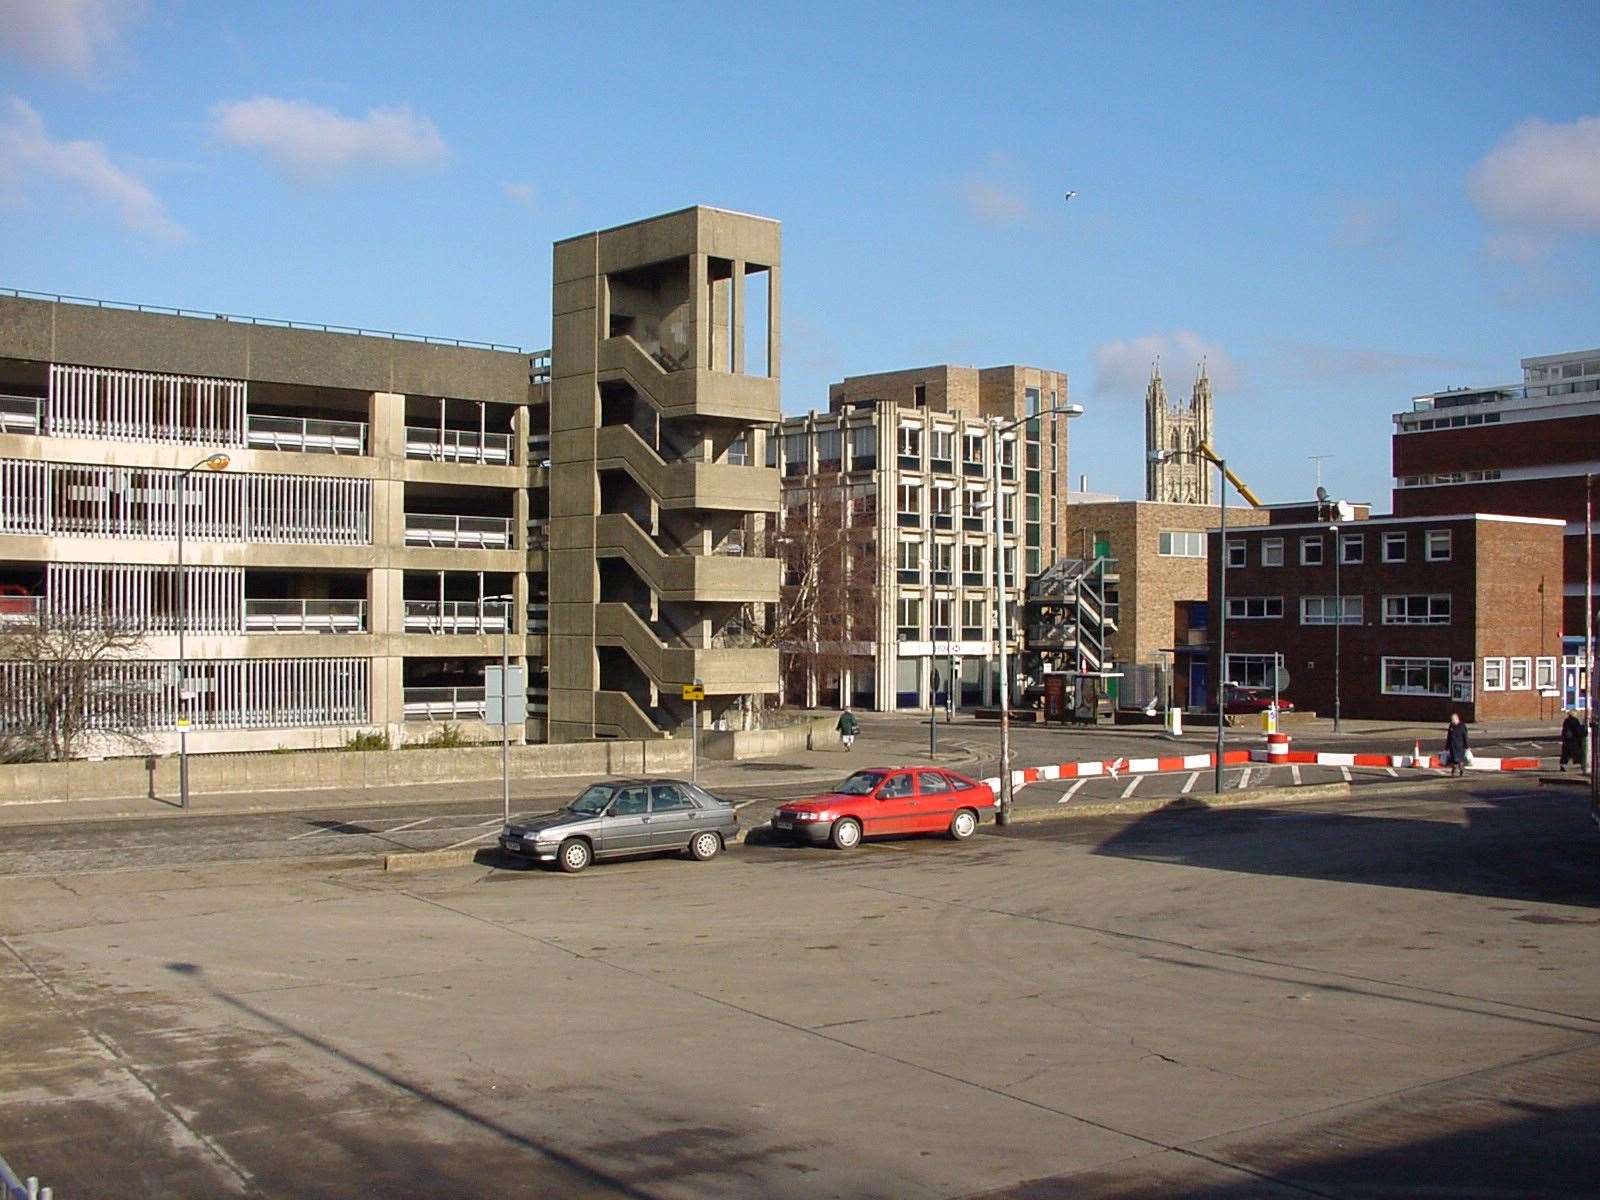 The multi-storey car park in Canterbury in 1999 before the arrival of Whitefriars. Picture: Martyn Barr